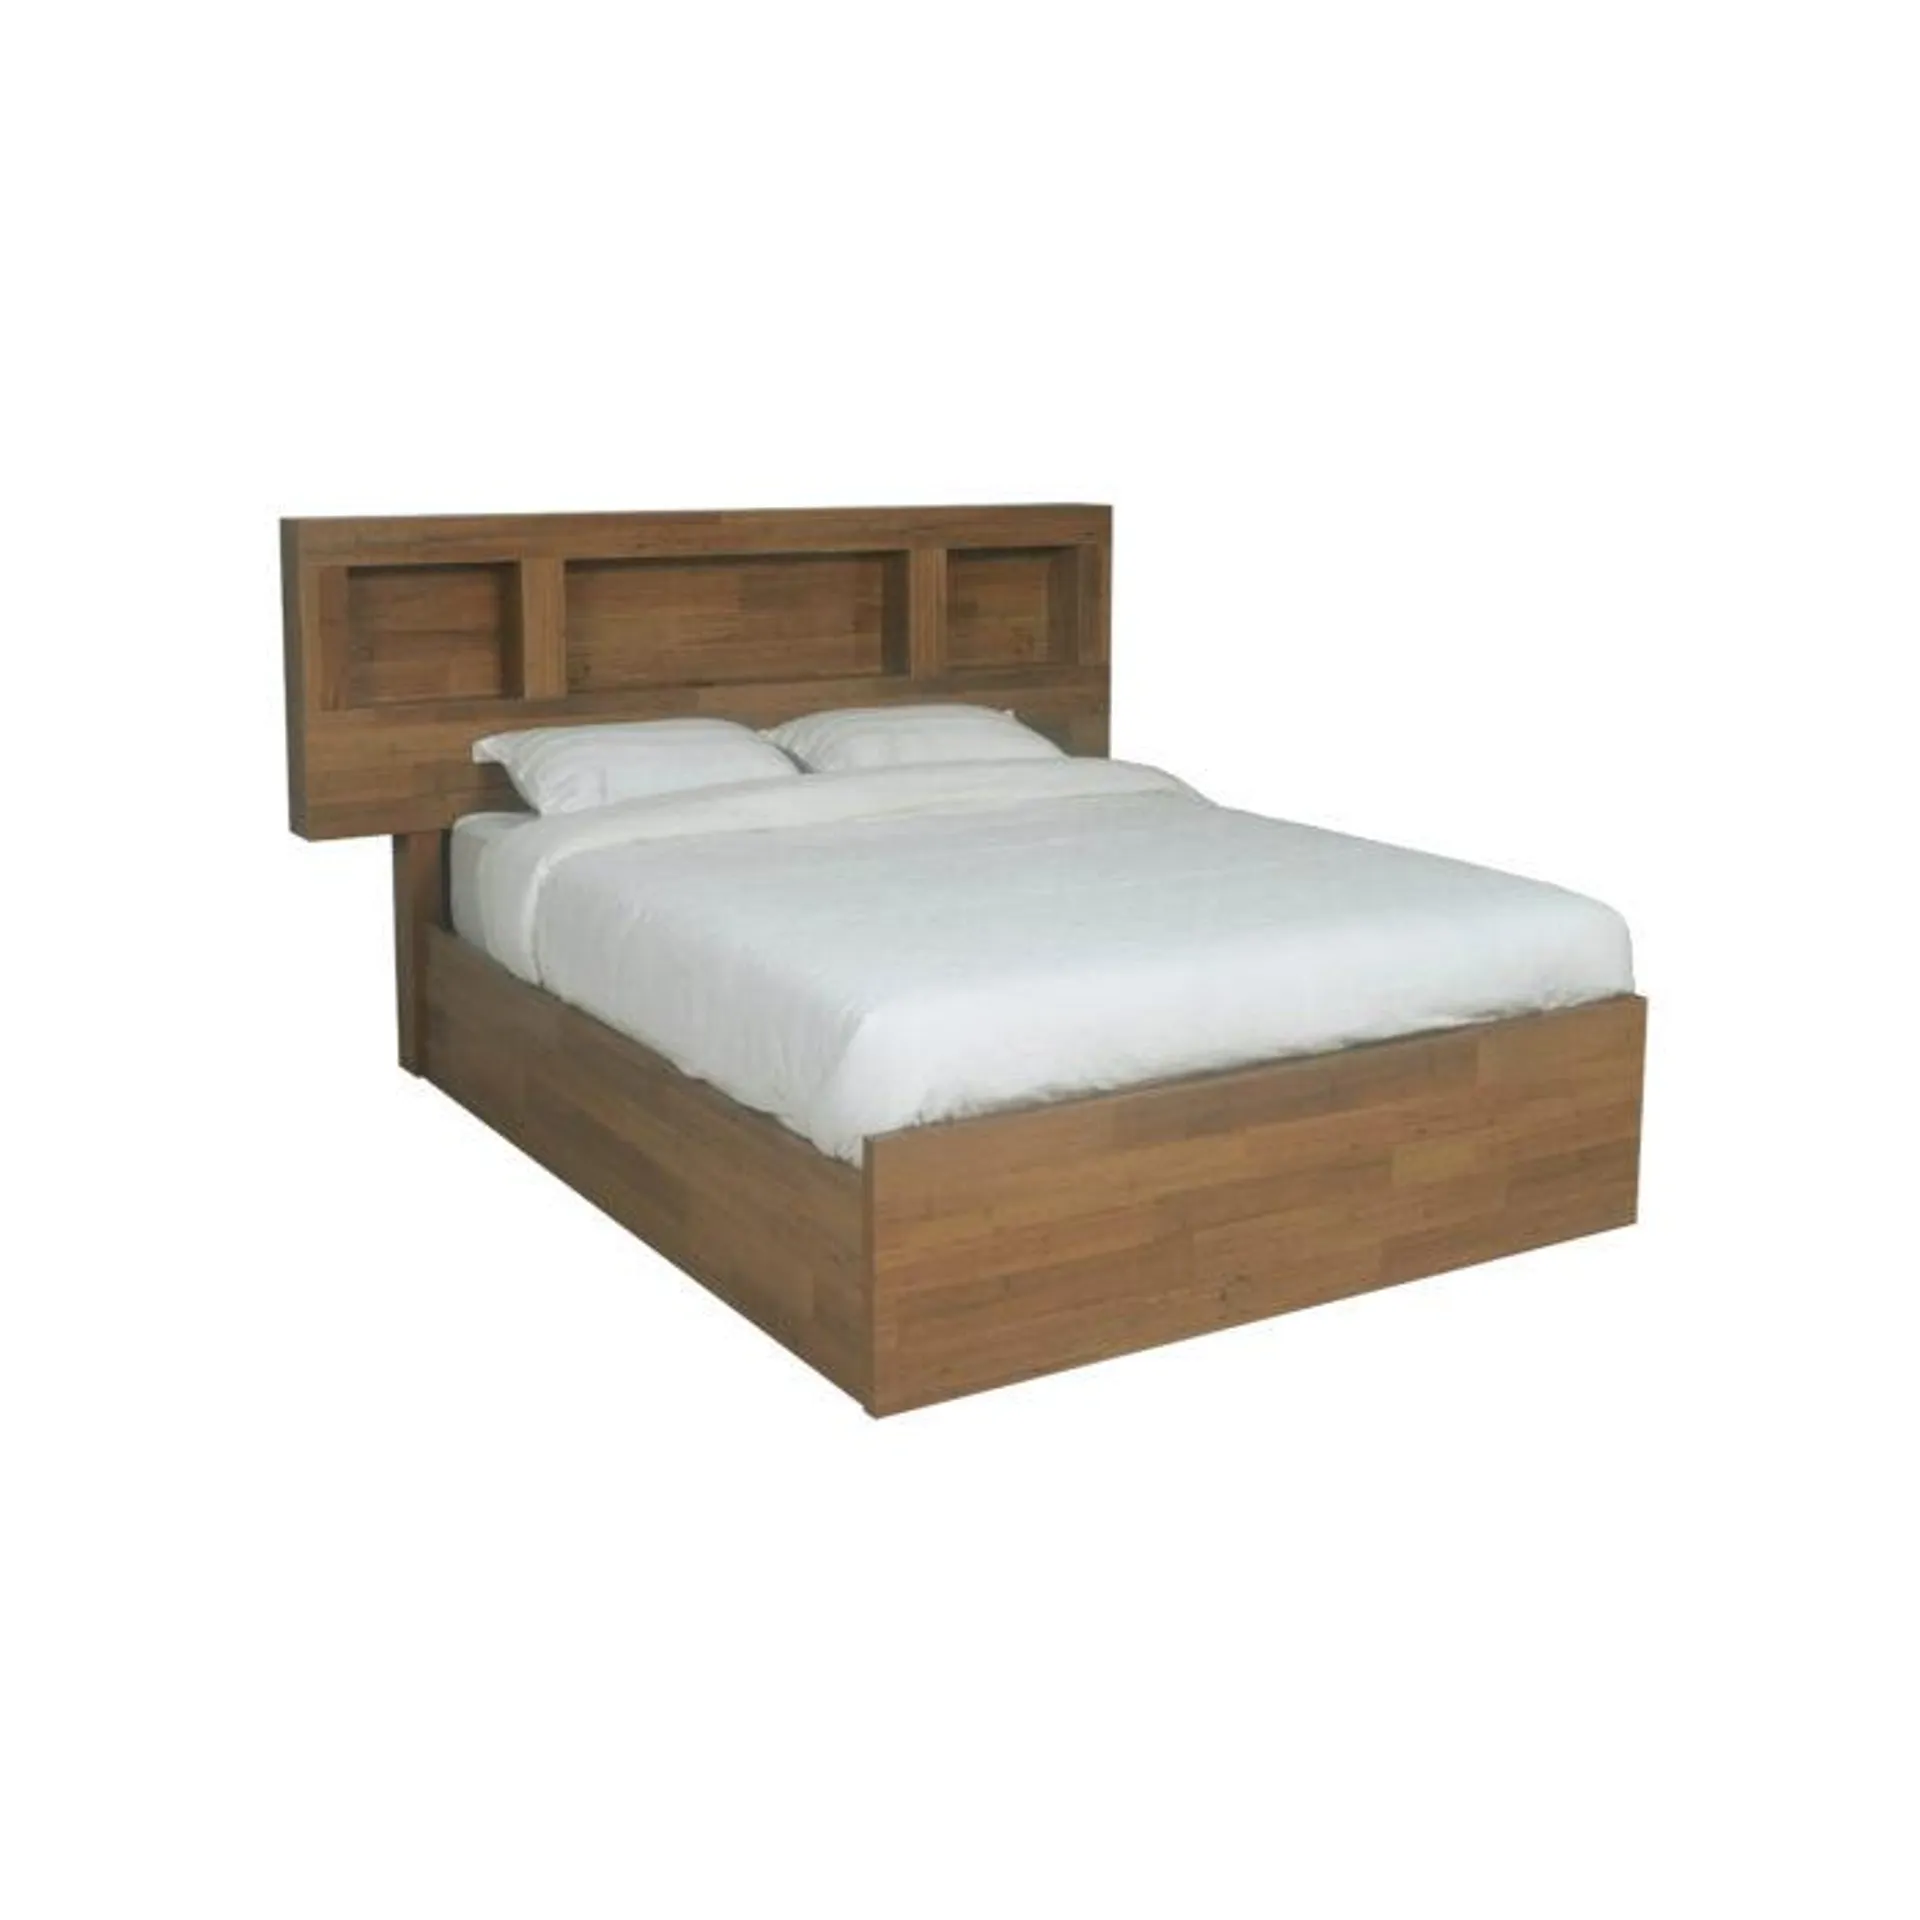 Avondale King Gas Lift Timber Bed